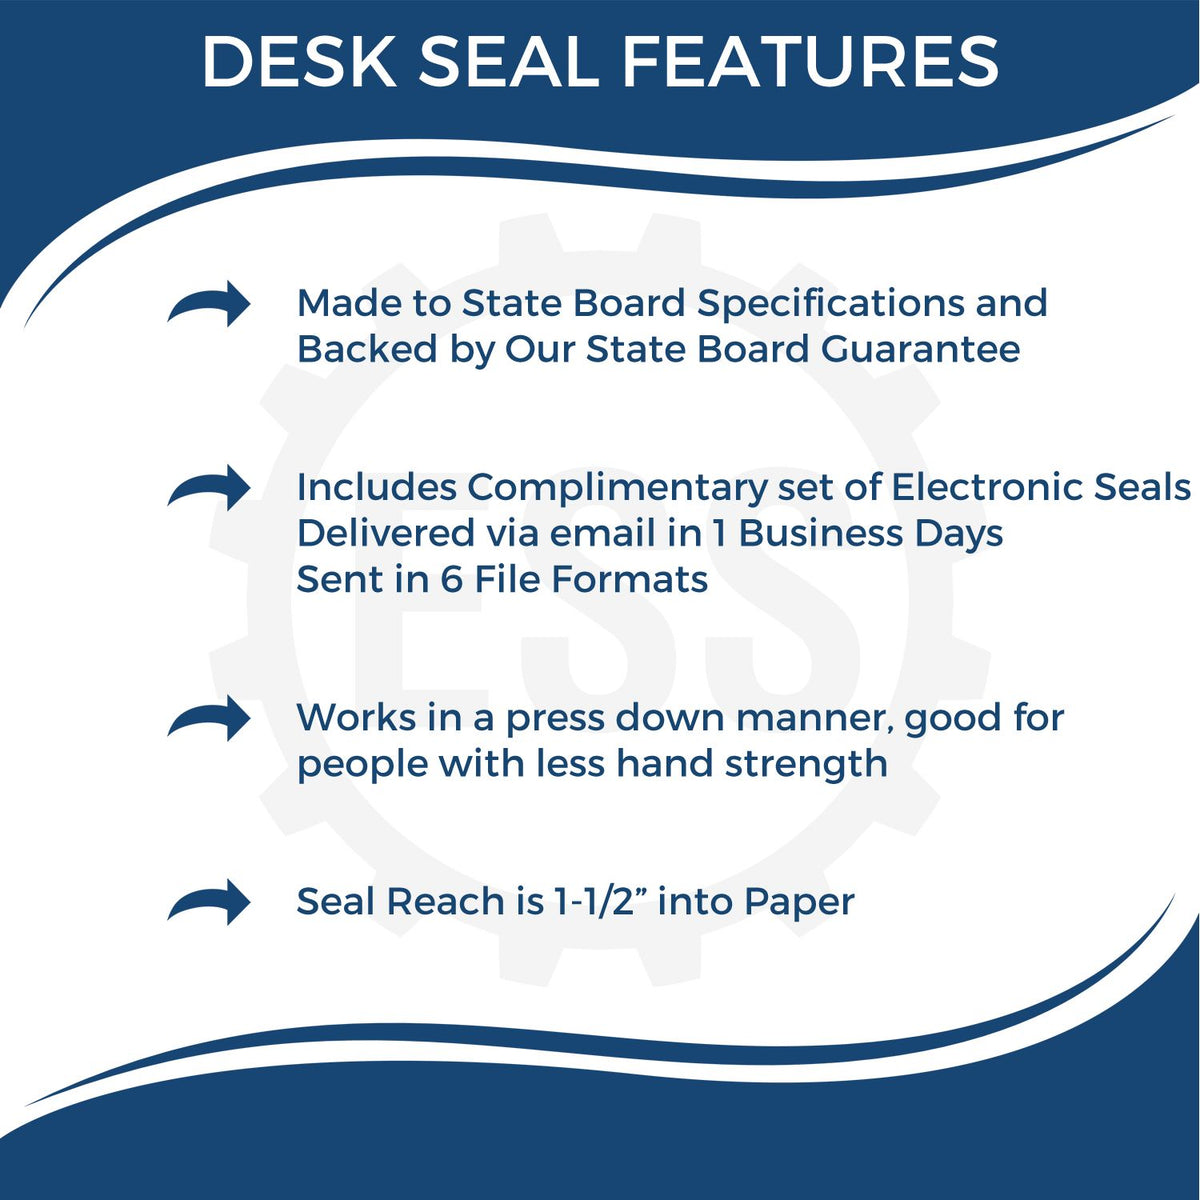 A picture of an infographic highlighting the selling points for the Georgia Engineer Desk Seal